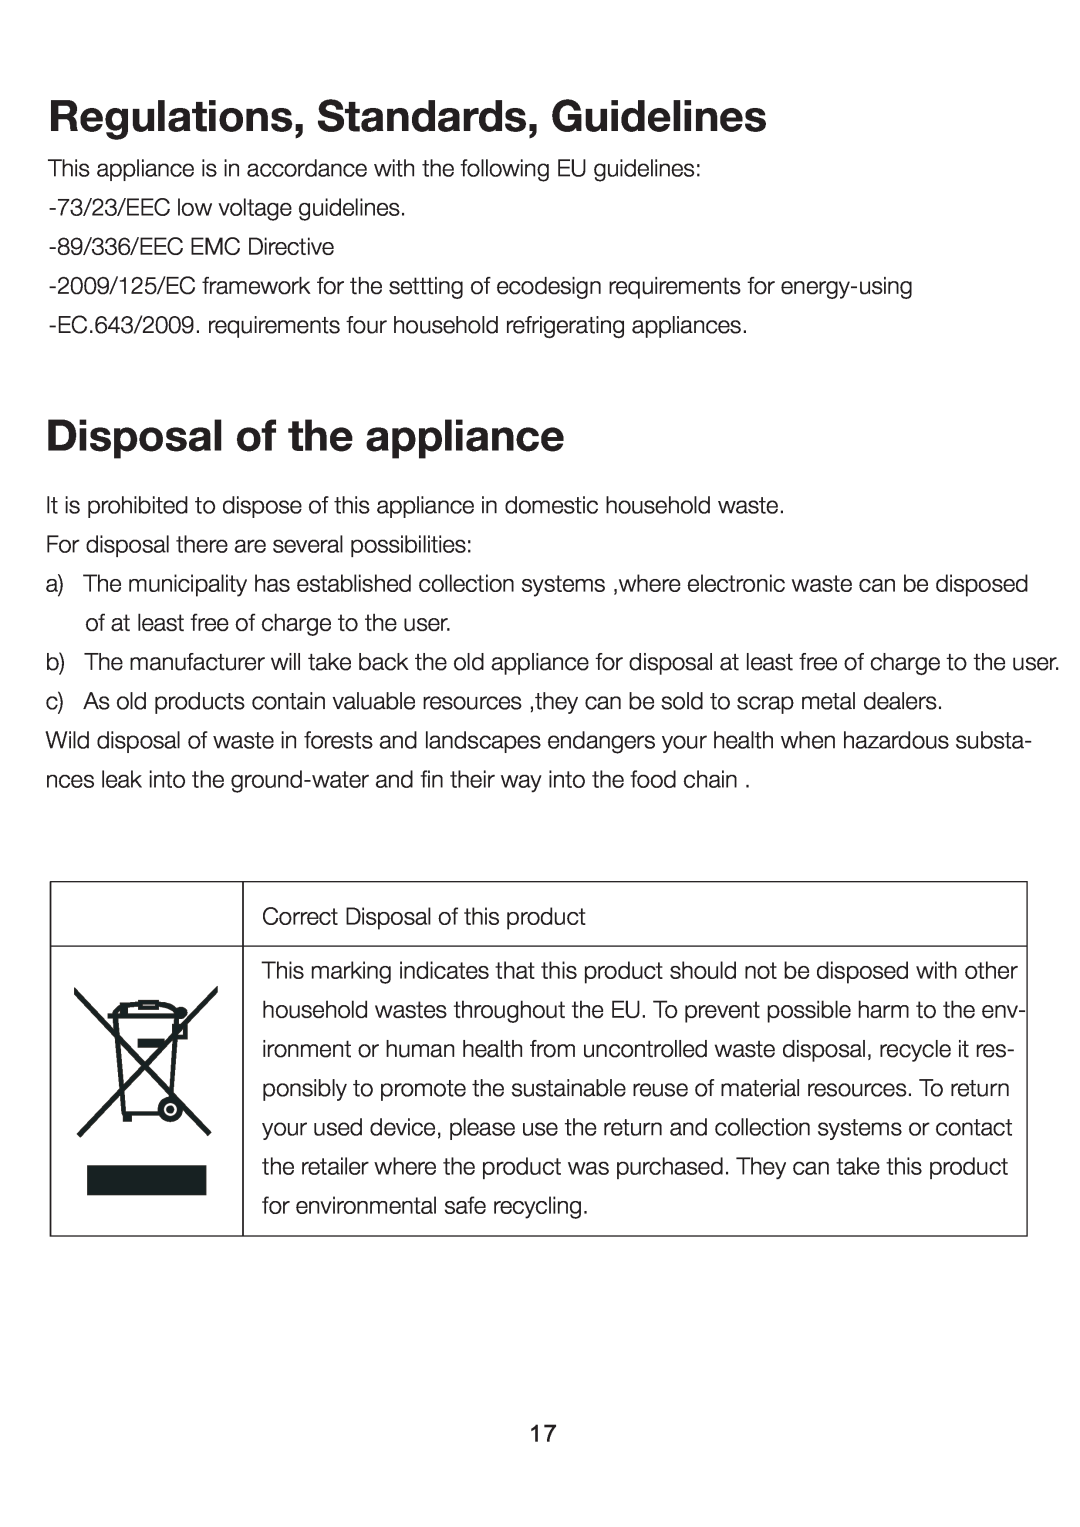 Ariston SD 350 I (FE) manual Regulations, Standards, Guidelines, Disposal of the appliance 